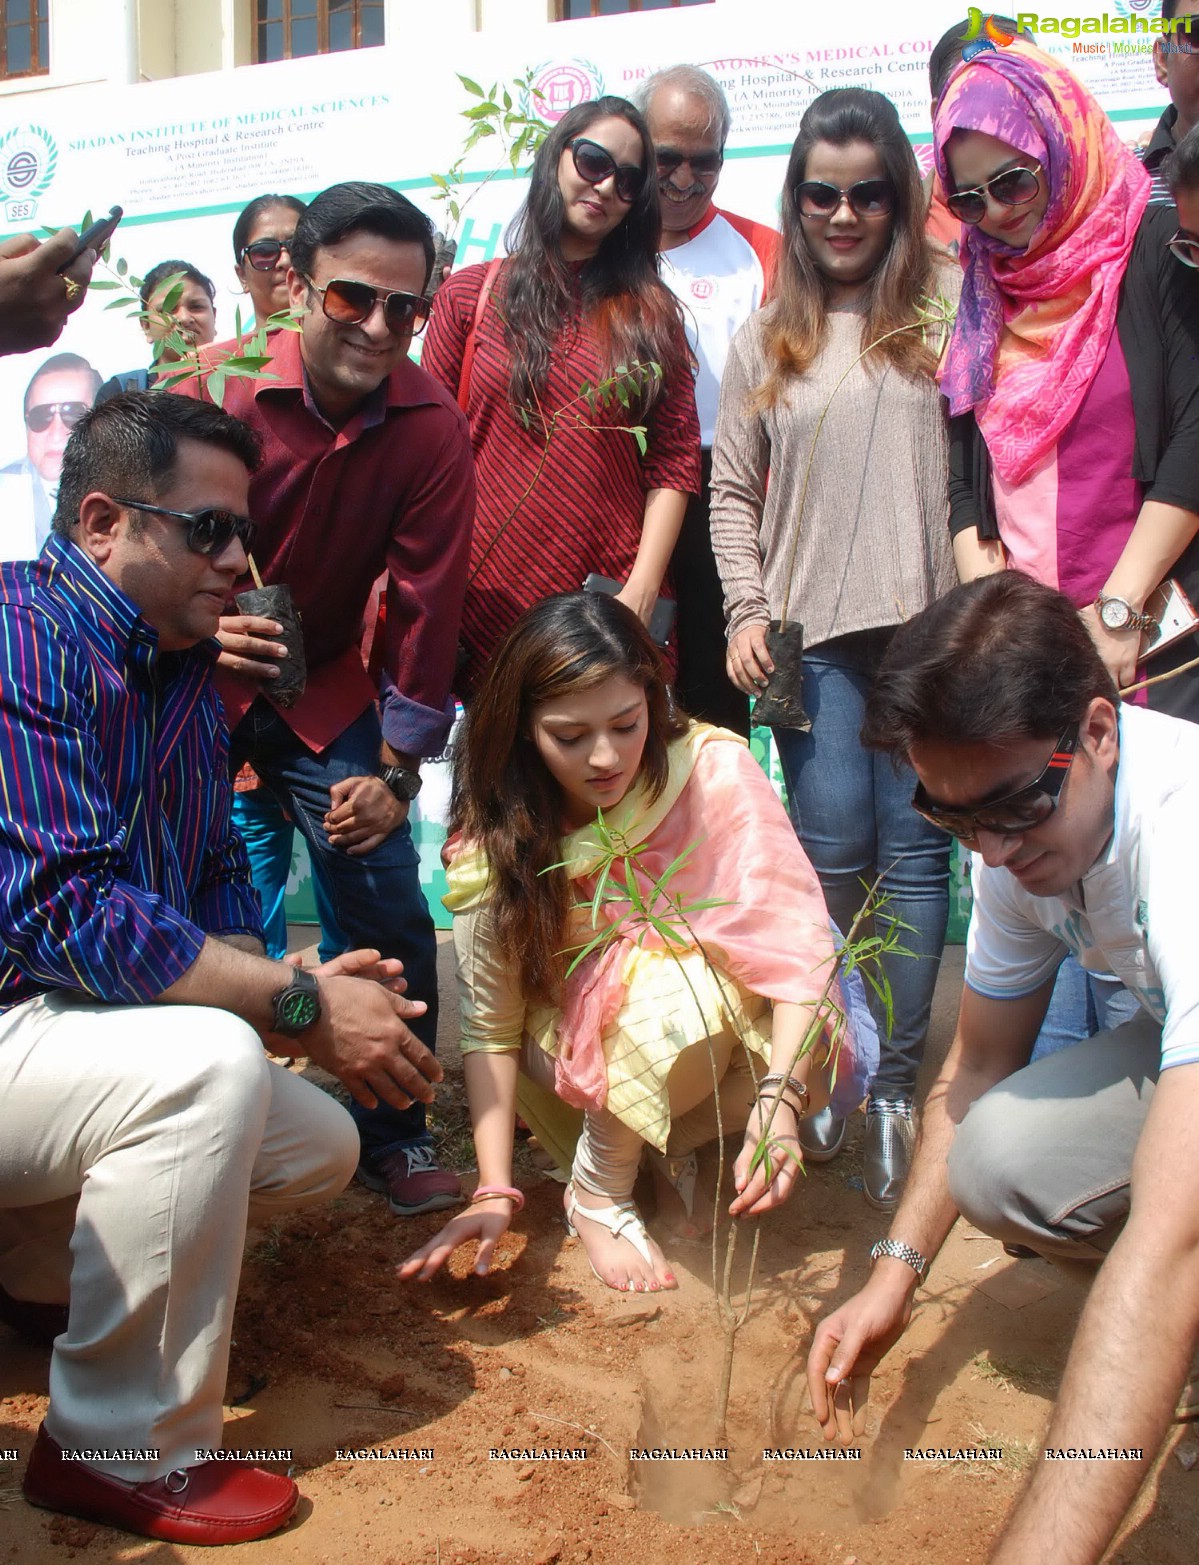 Mehrene Kaur at Haritha Haram Event by Shadan Institute of Medical Sciences